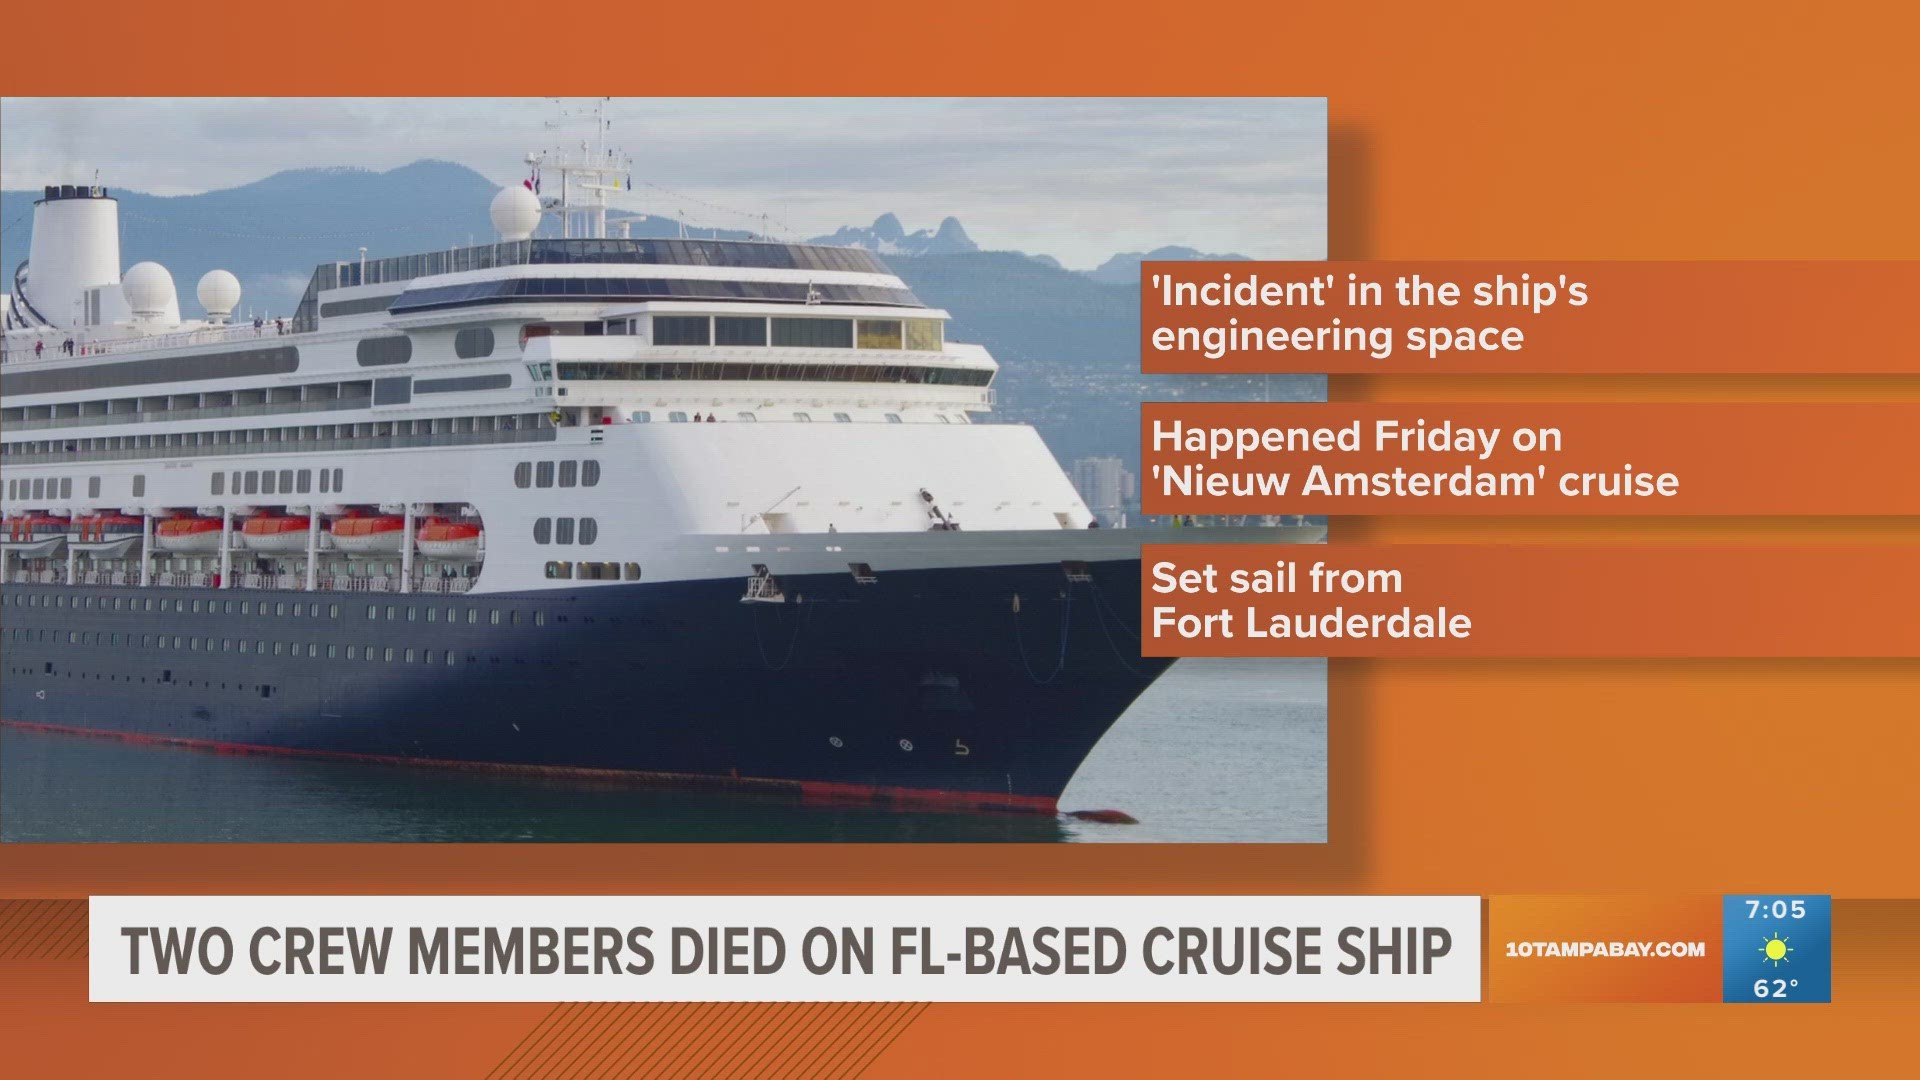 The unidentified crew members died Friday while the Florida-based Nieuw Amsterdam was at Half Moon Cay in the Bahamas.